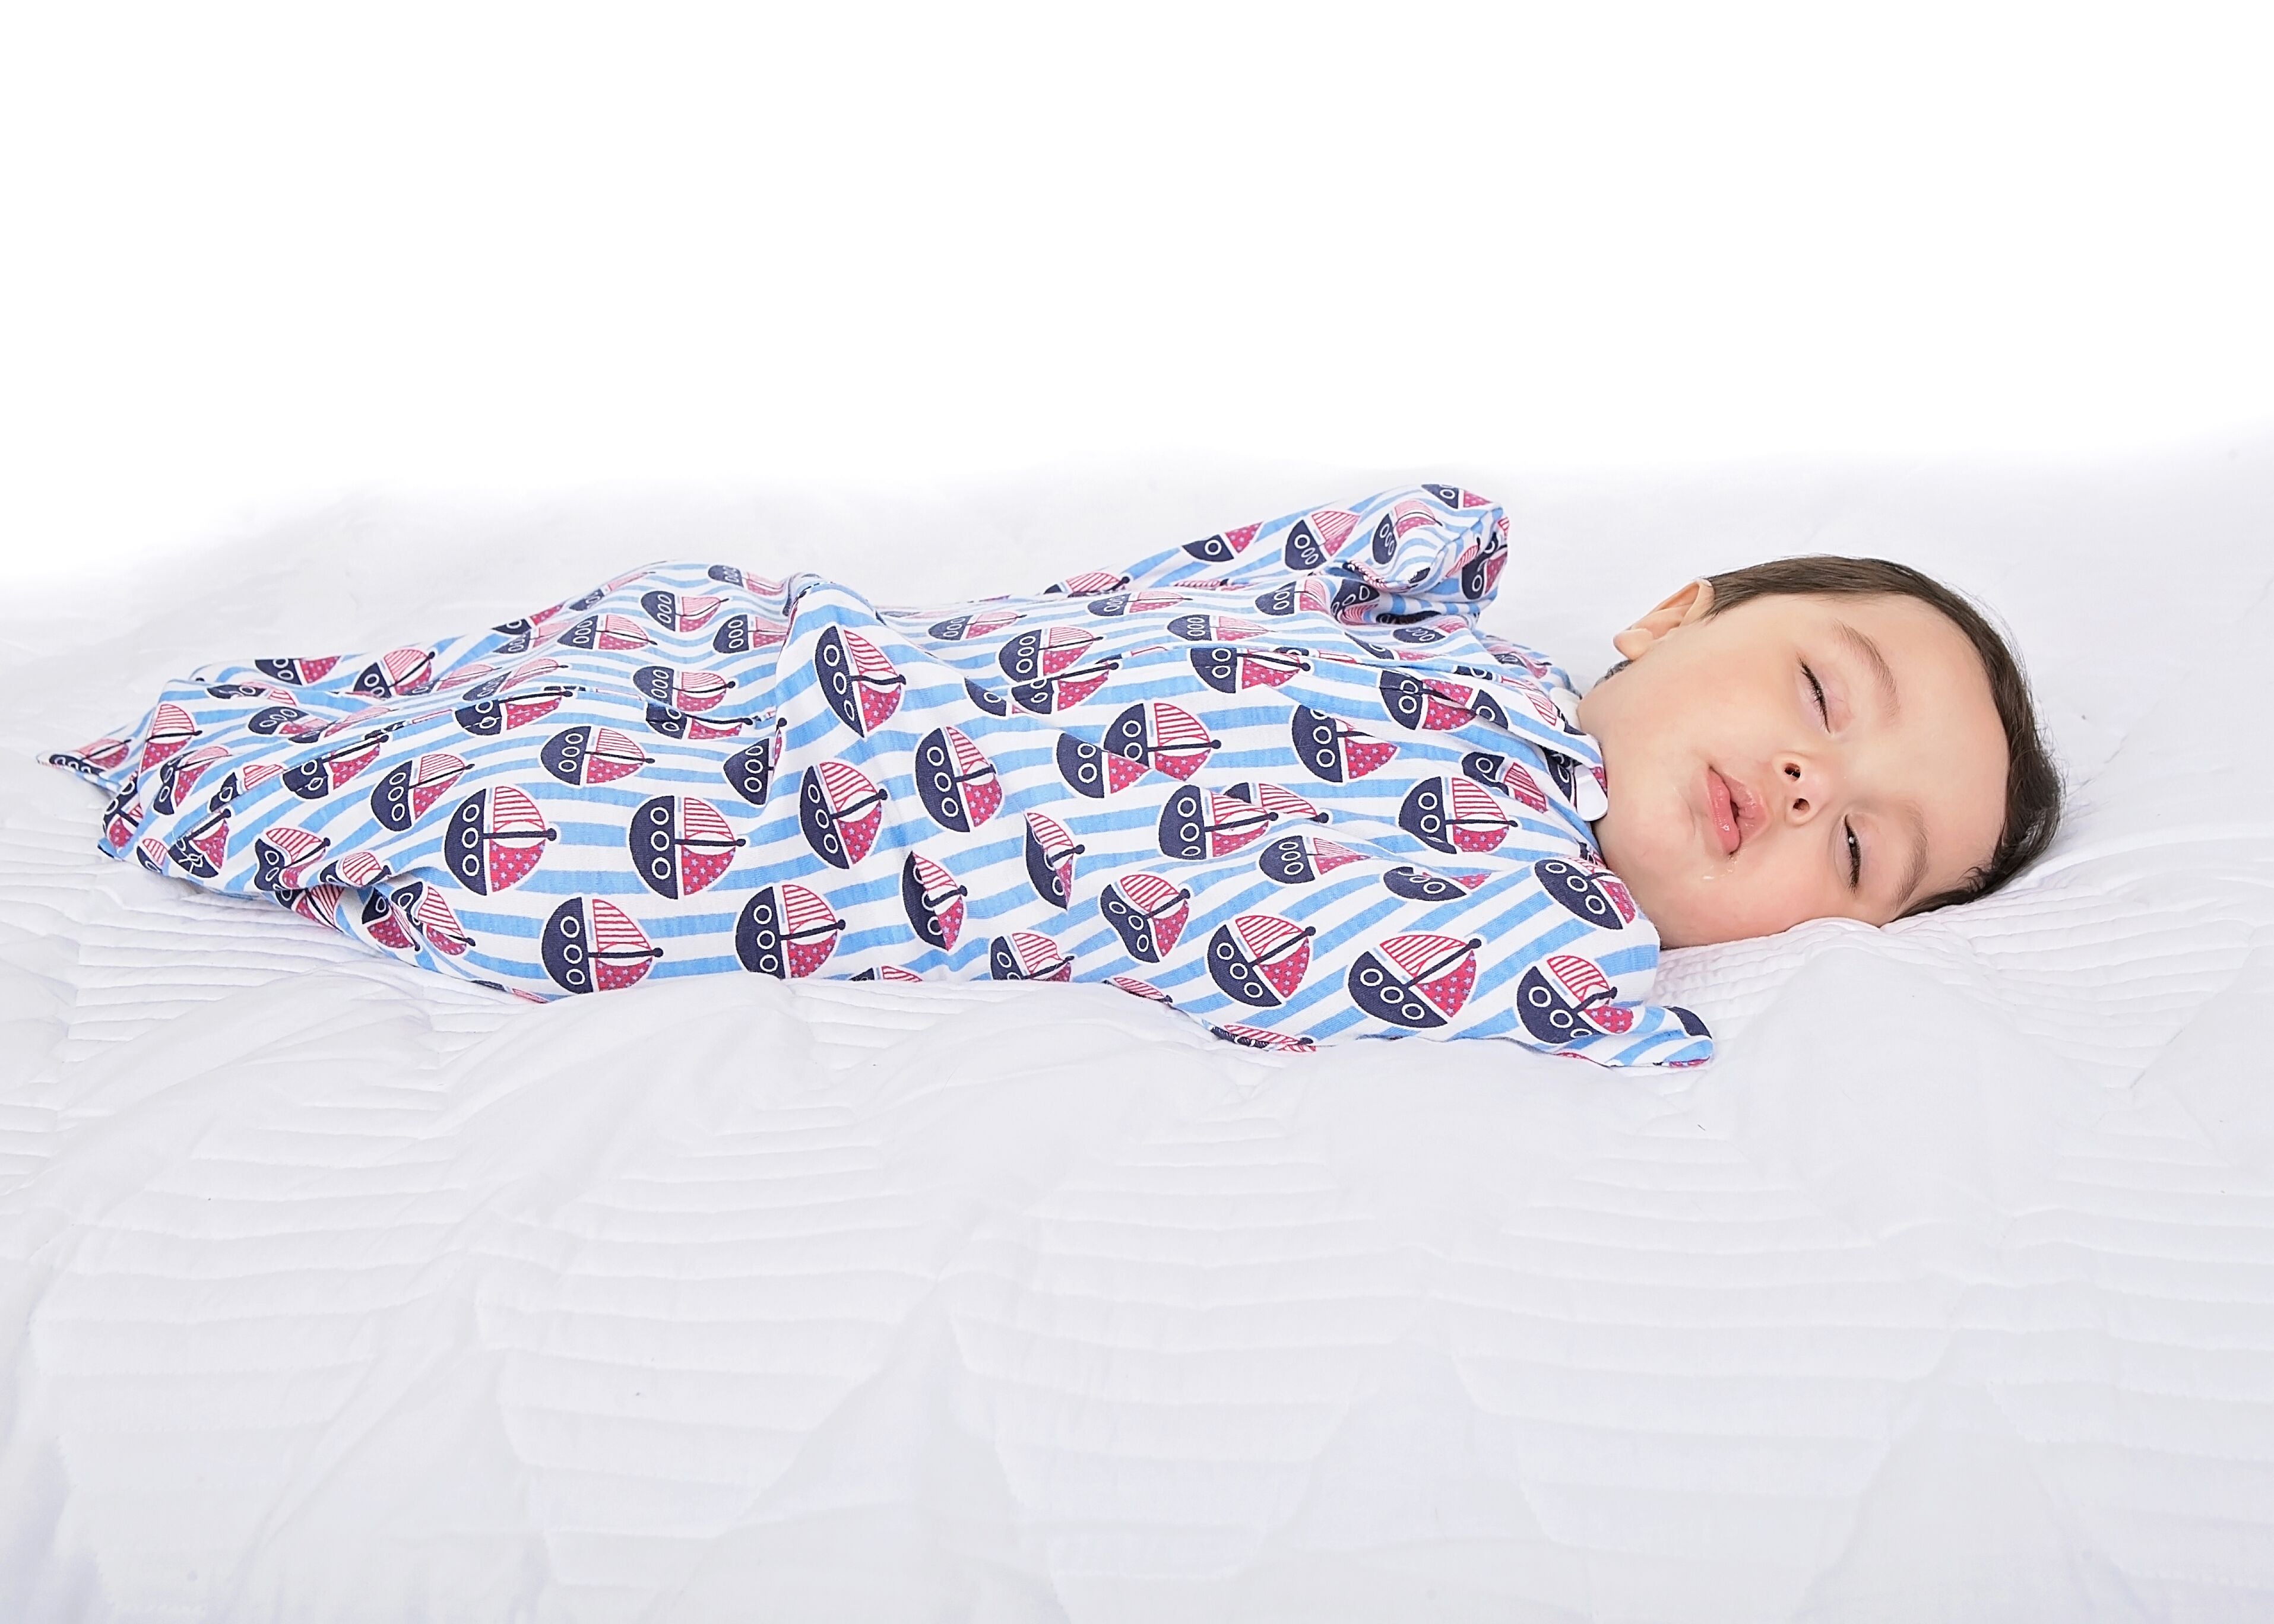 Does the TOG Rating of a Sleep Bag Include Anything Underneath?